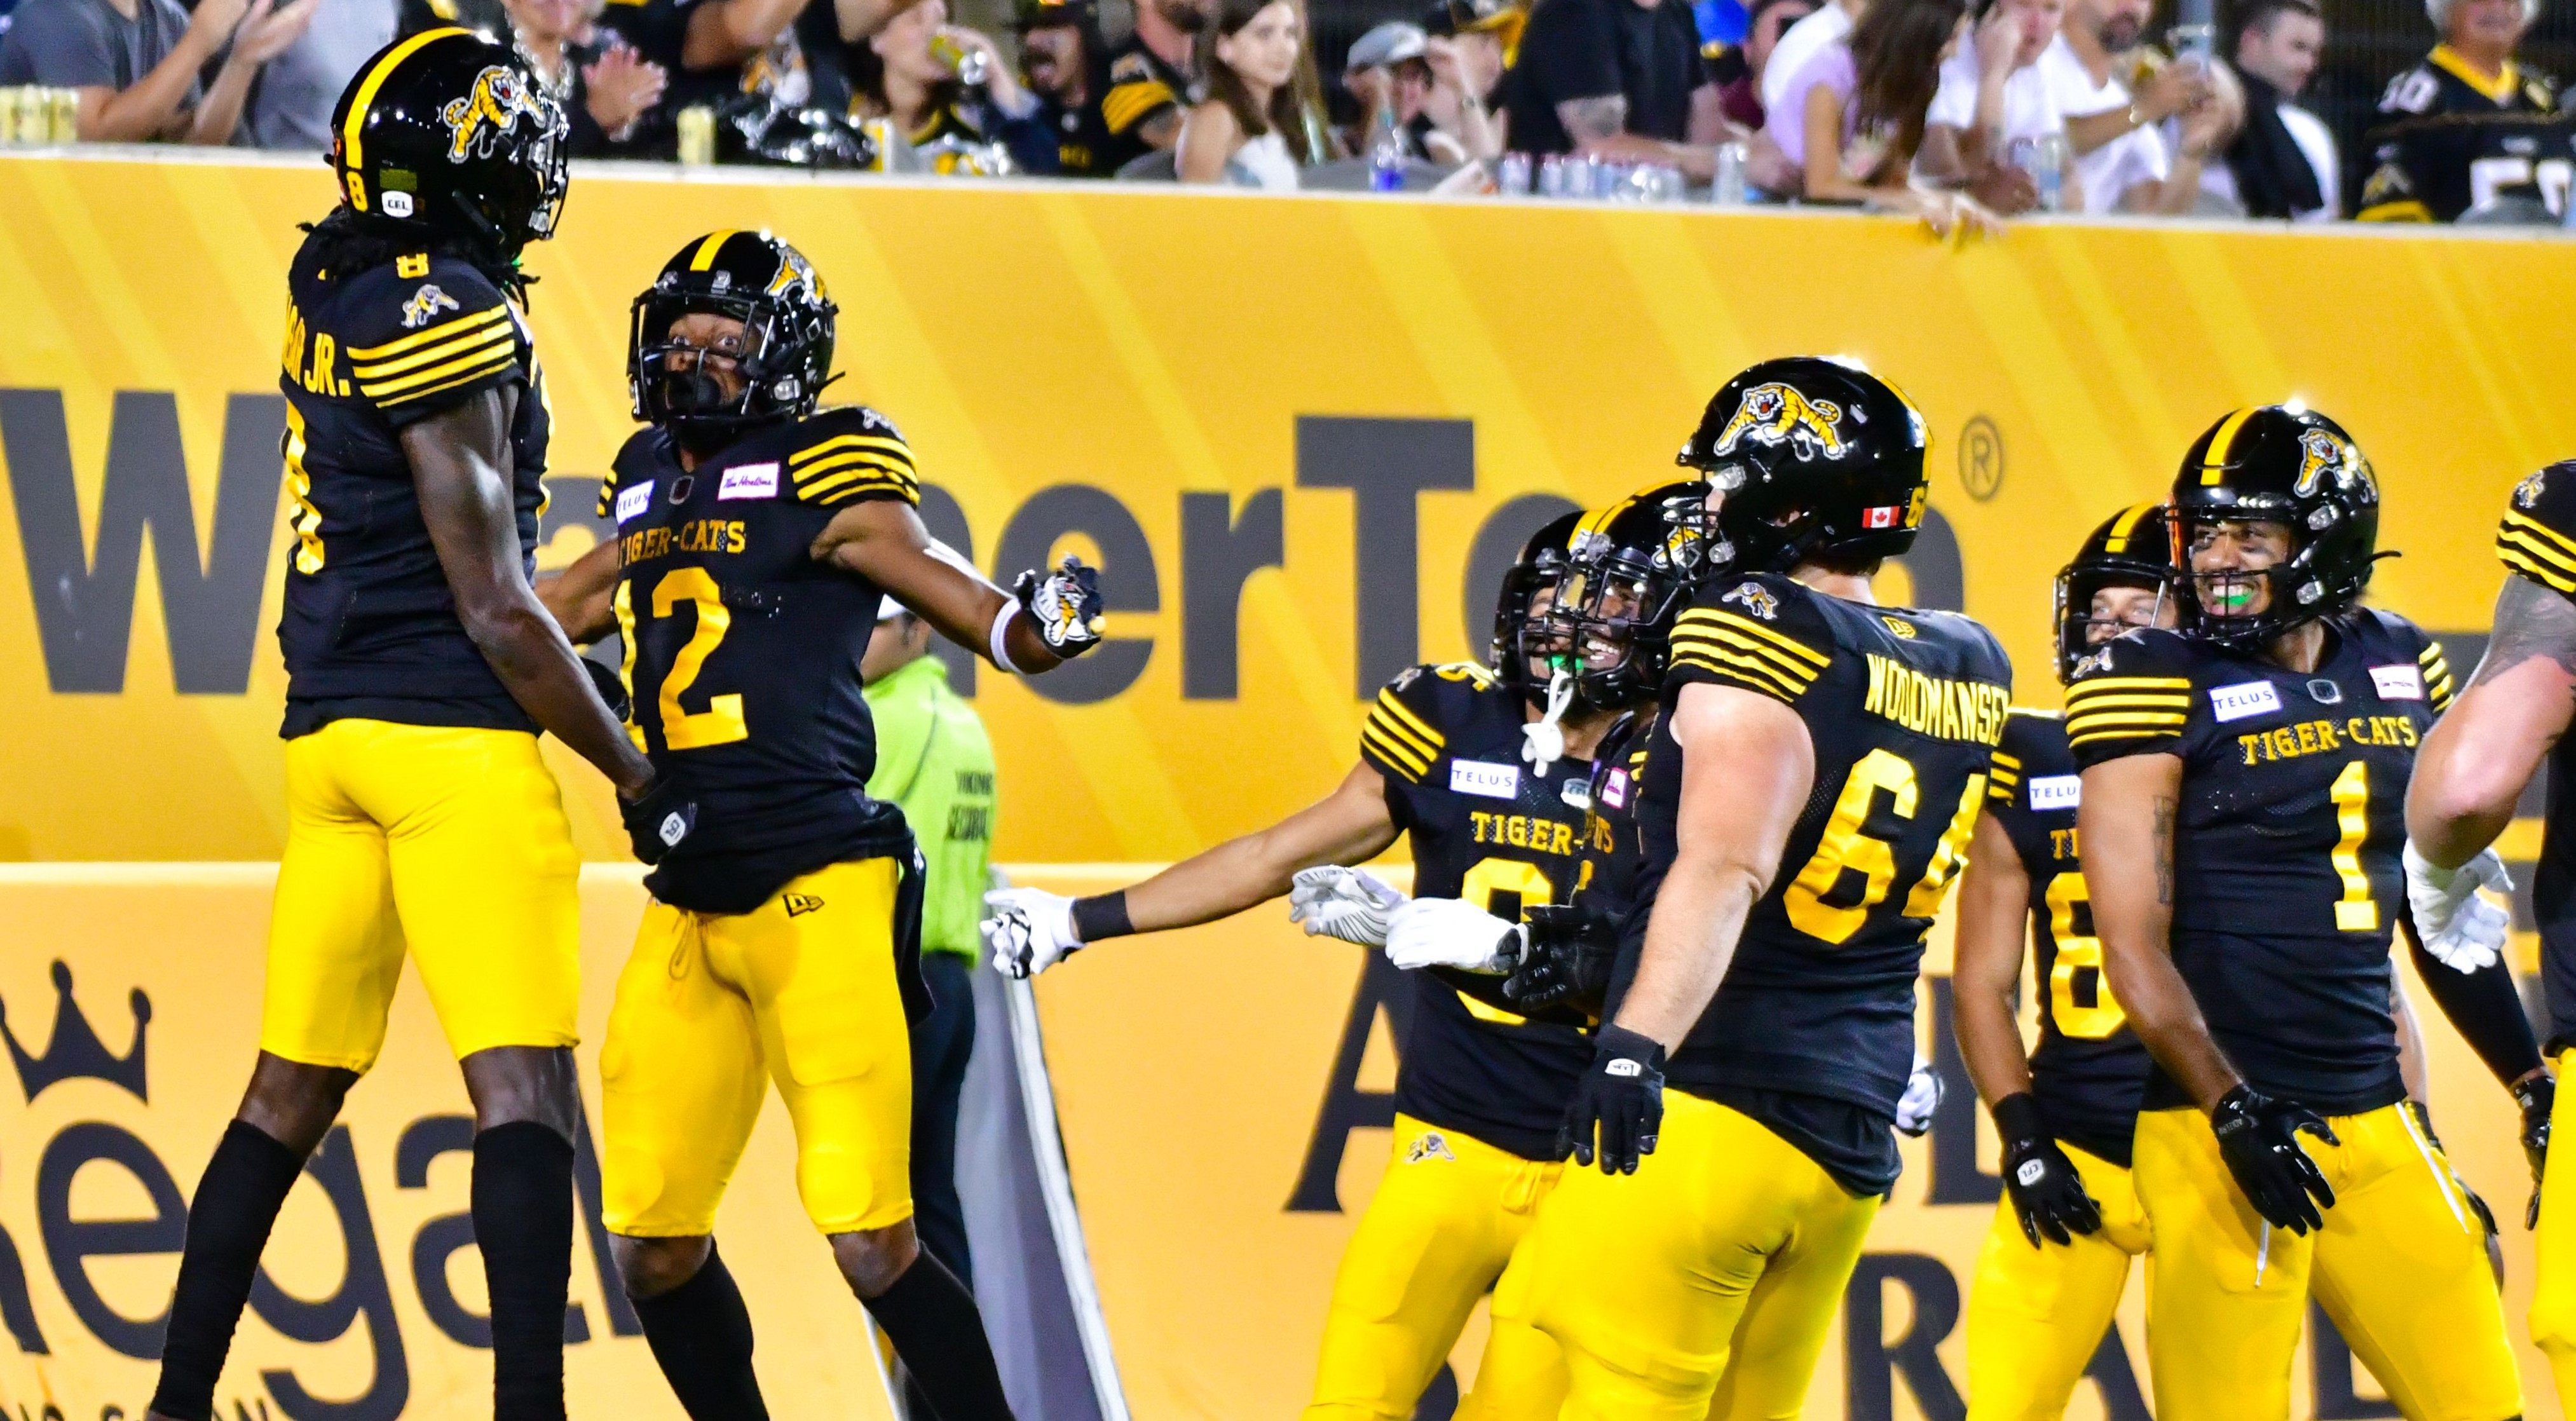 Hamilton Tiger-Cats celebrating a touchdown in the endzone